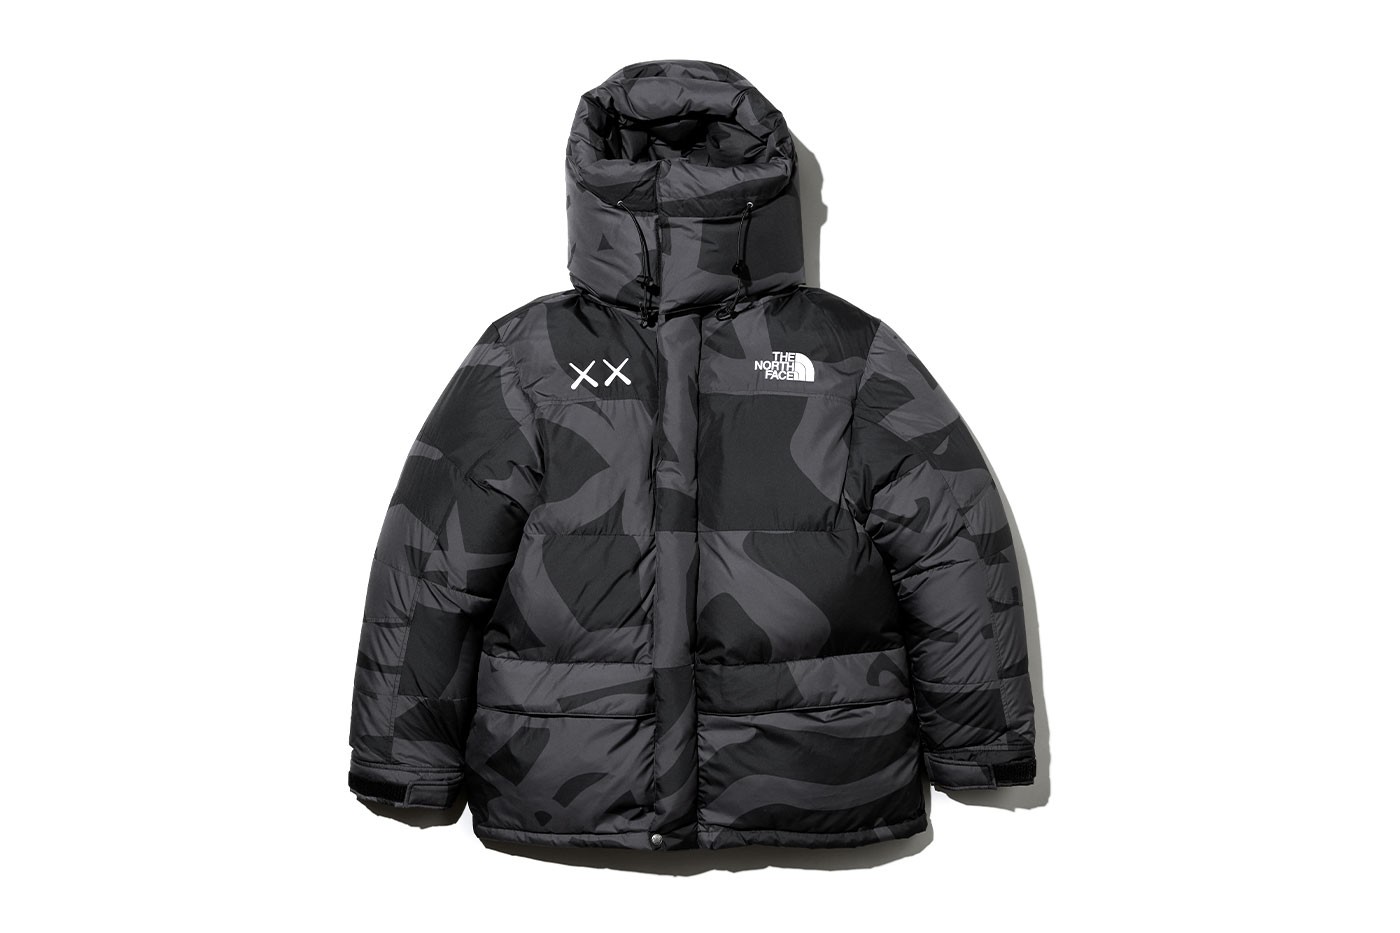 The North Face x KAWS Automne/Hiver 2022